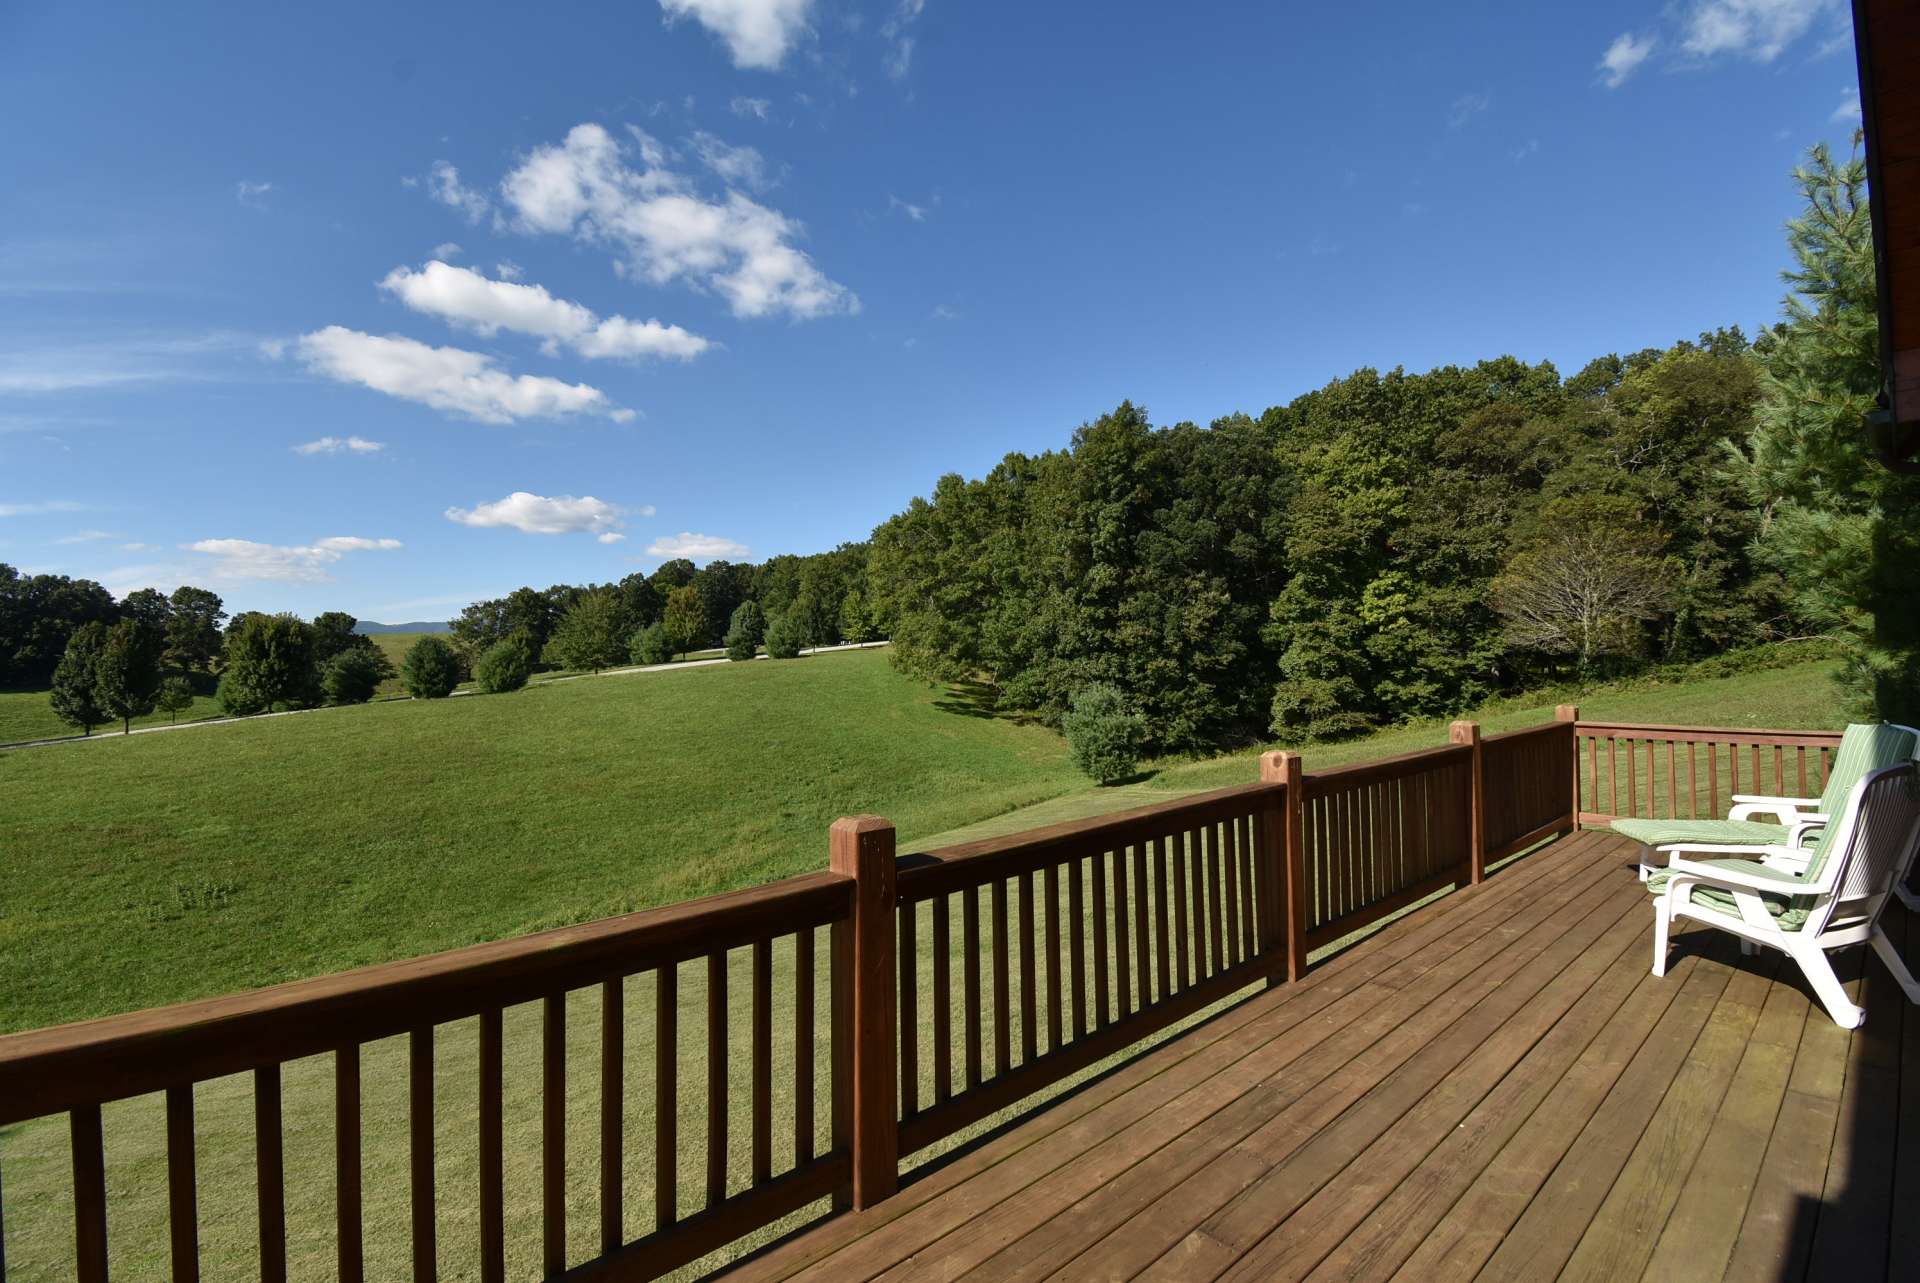 A full length open back deck offers plenty of outdoor grilling, dining and entertaining space. Or...simply relaxing with the views, gentle mountain breezes, and the sounds of Nature.